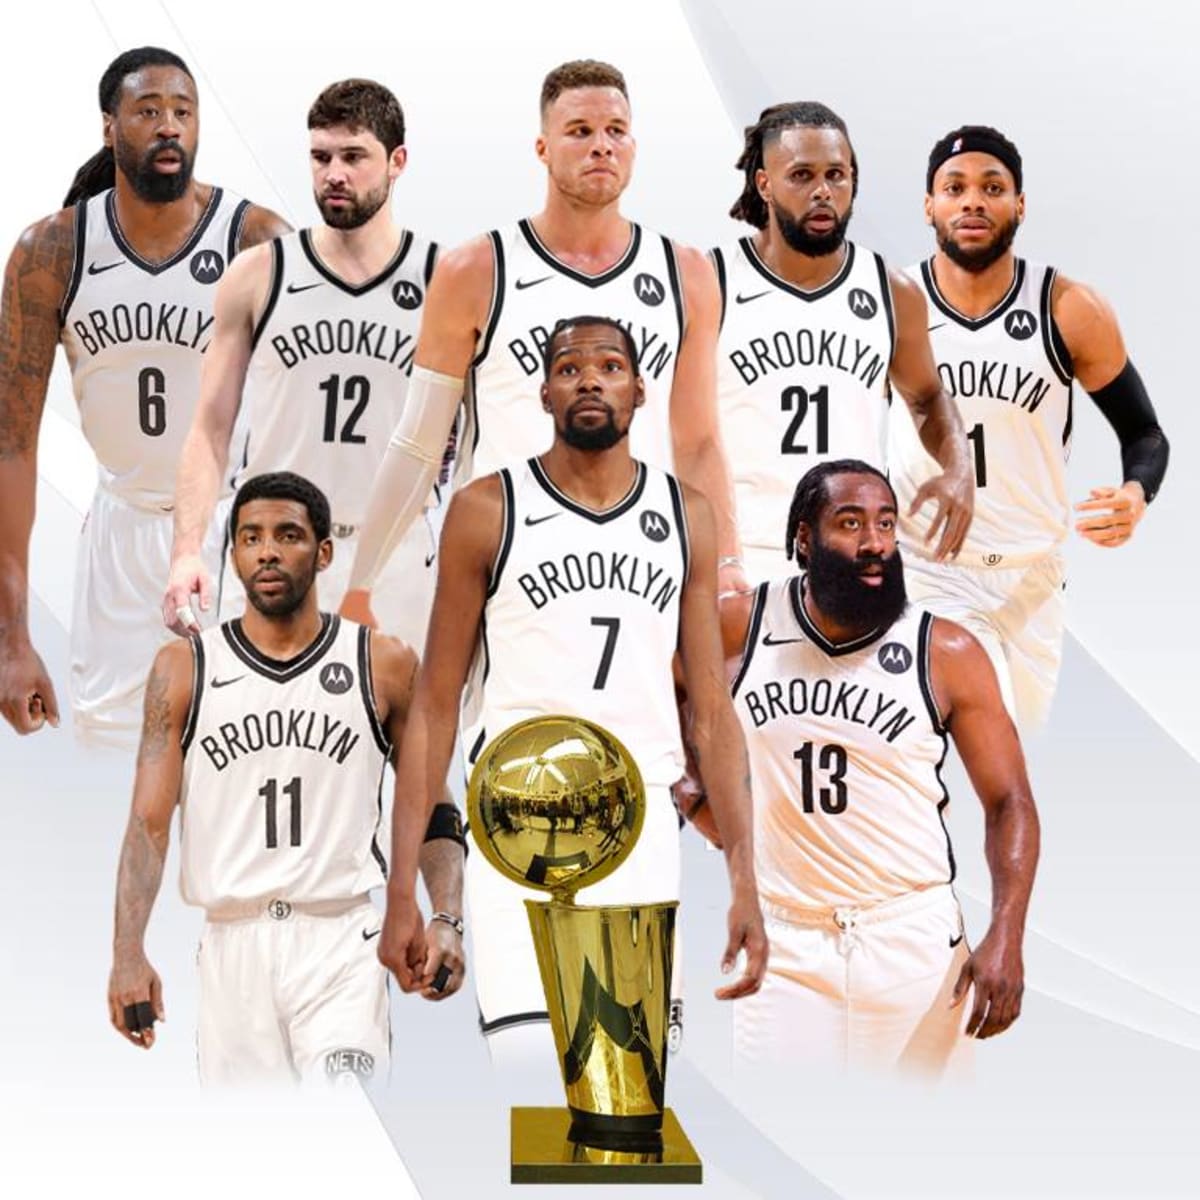 Patty Mills Is 'All In' For A Championship Run With The Brooklyn Nets